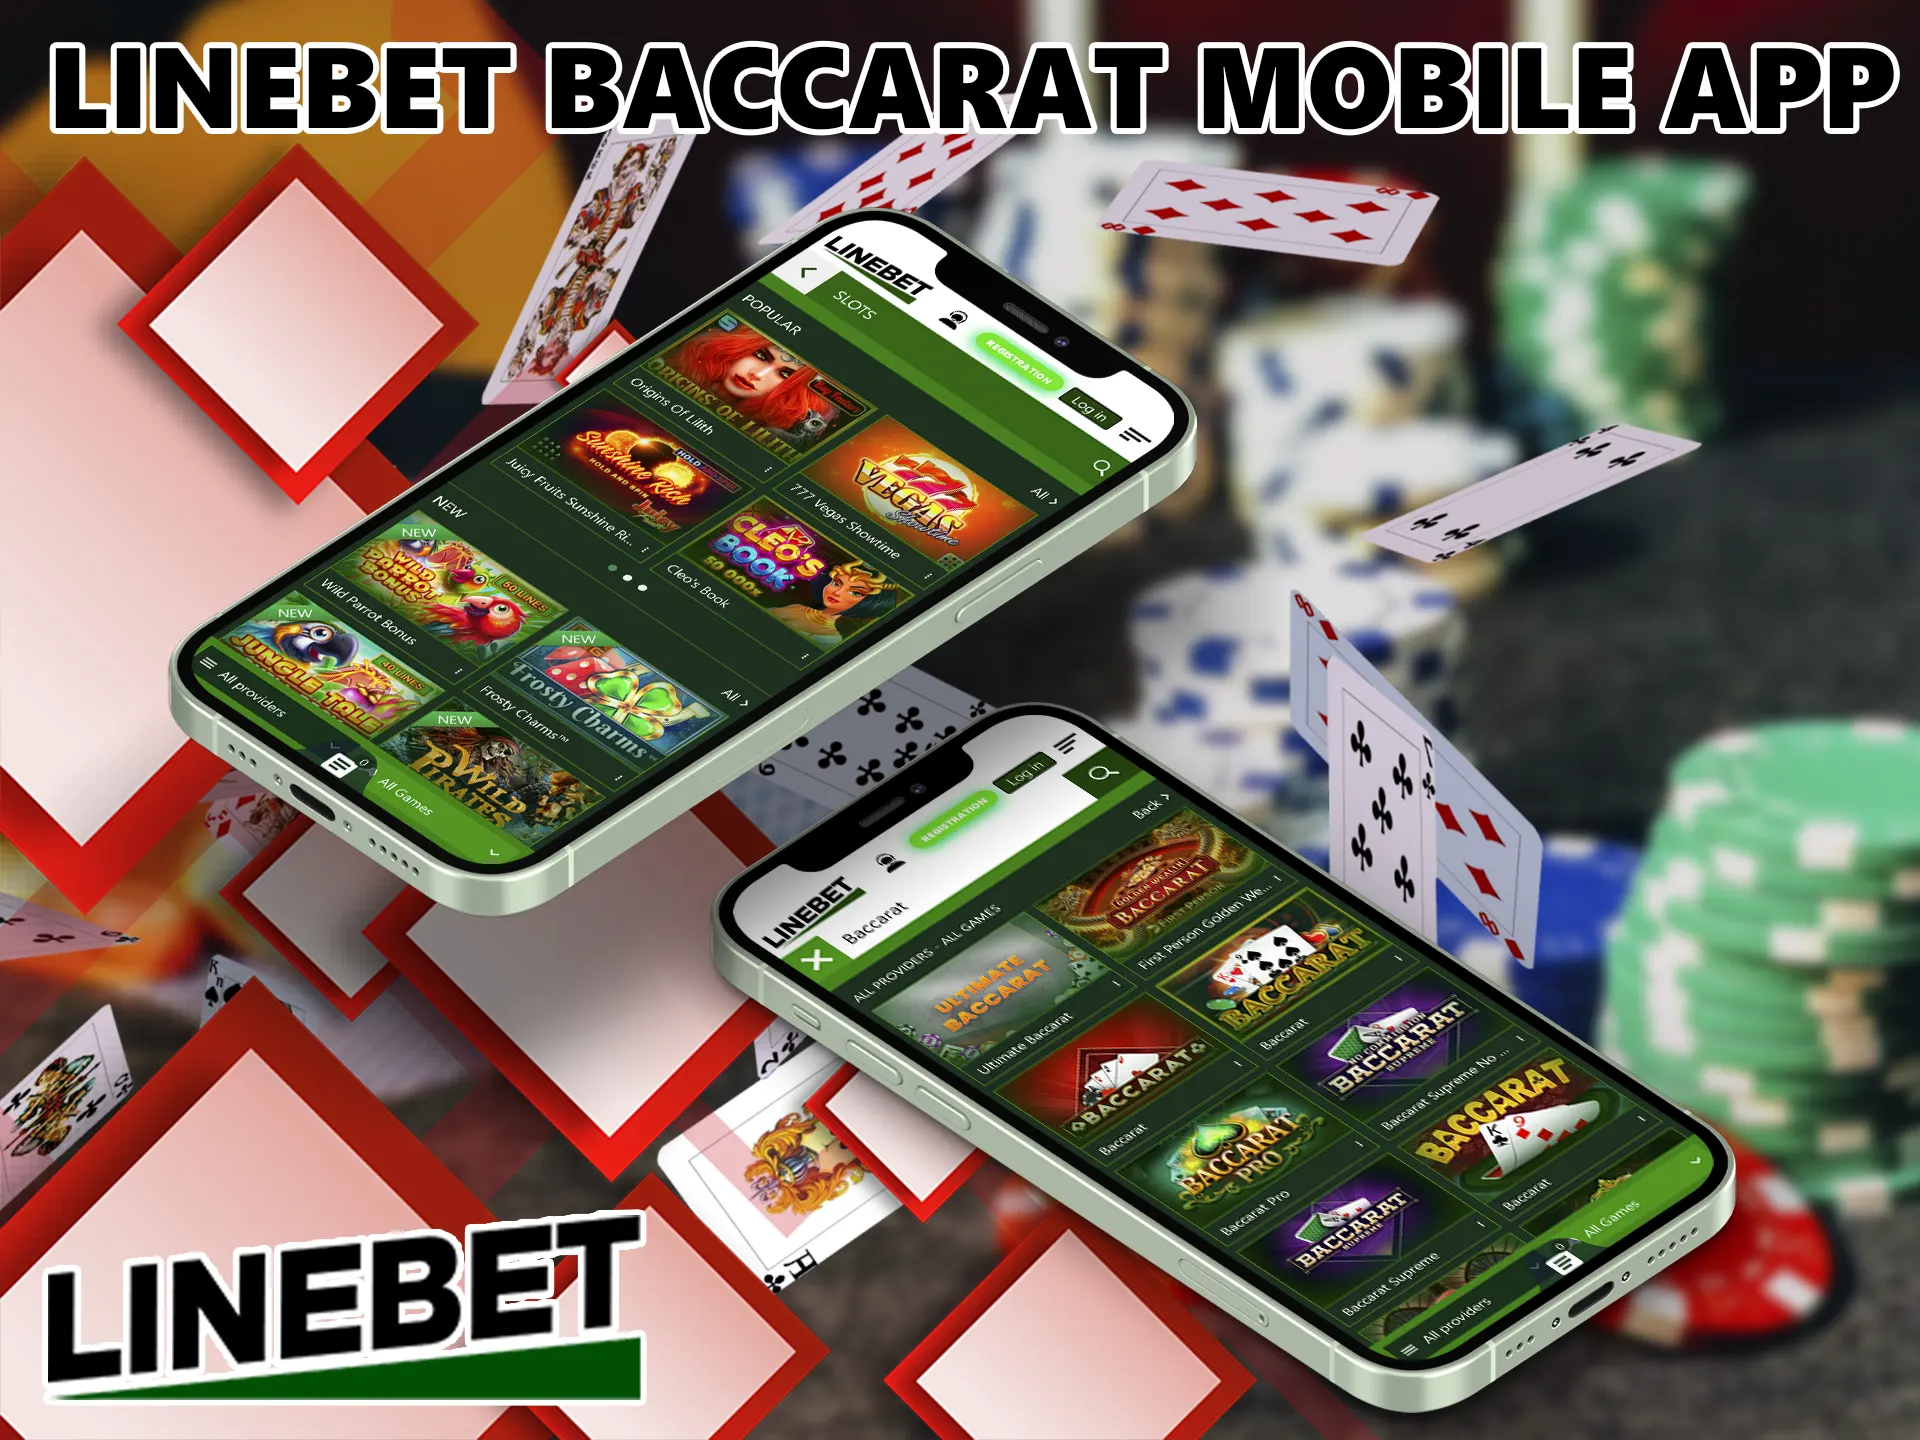 Anyone user from India can play any Linebet game they like by downloading the software for their smartphone.